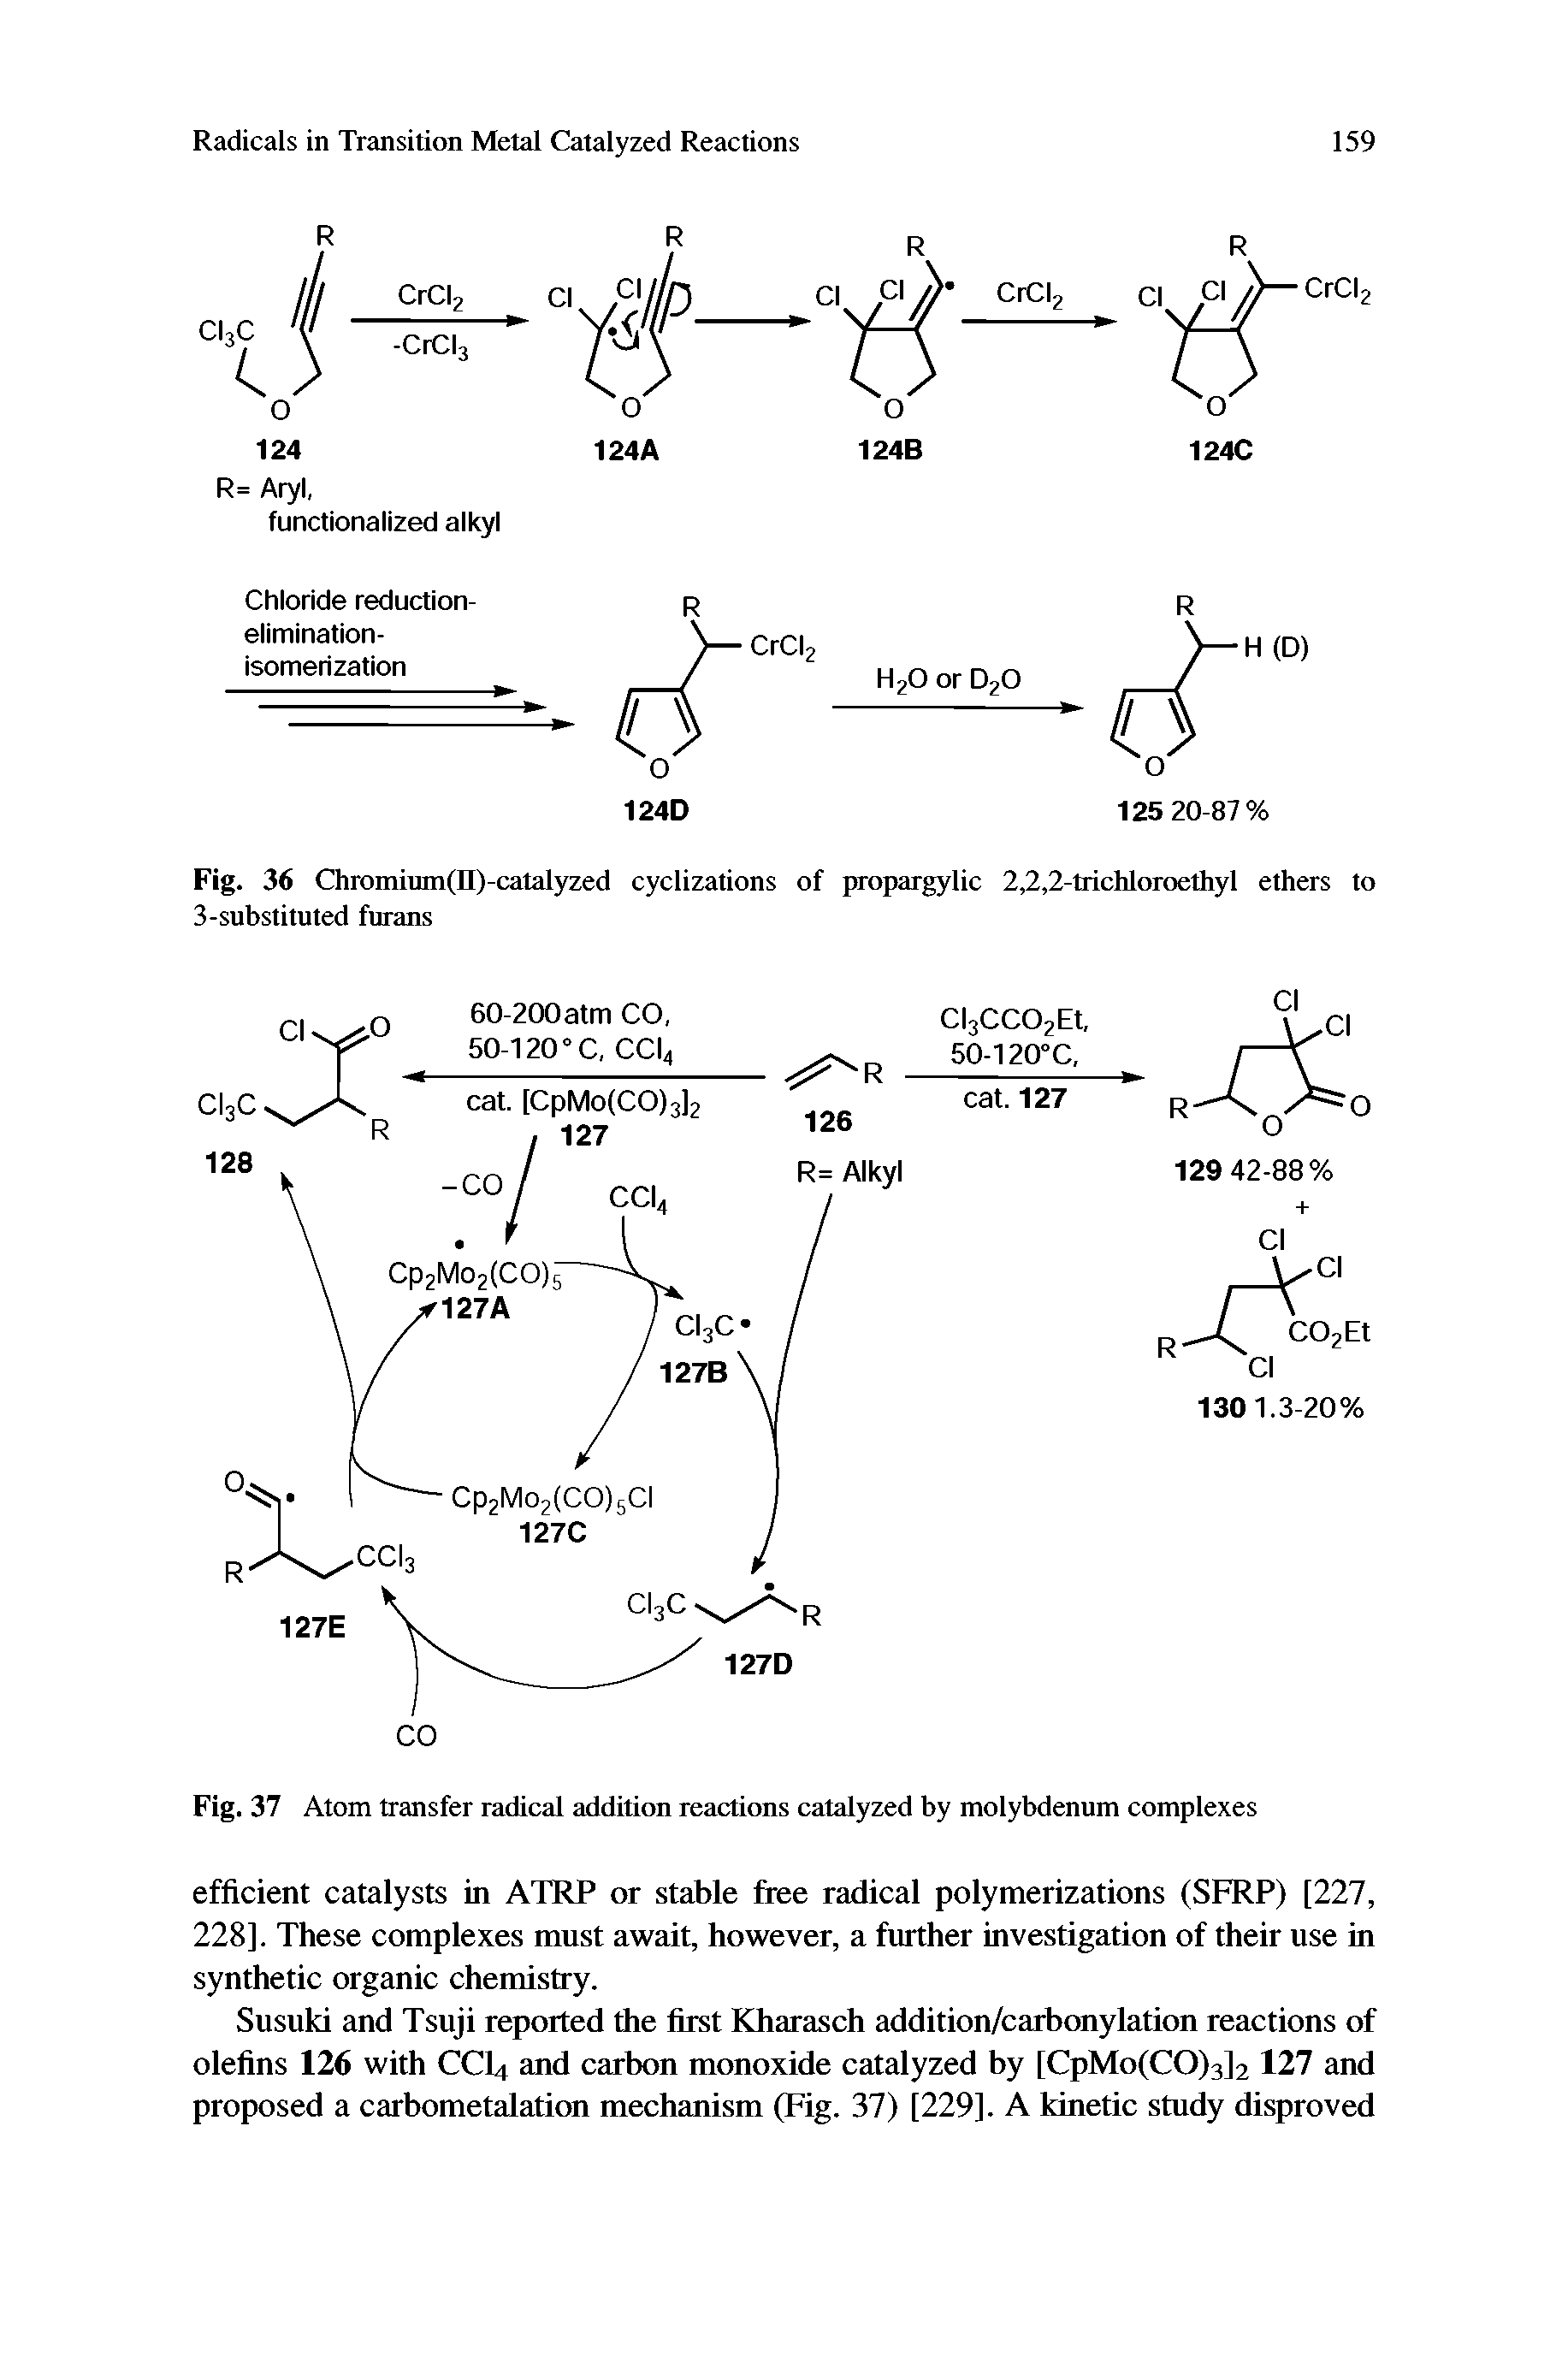 Fig. 37 Atom transfer radical addition reactions catalyzed by molybdenum complexes...